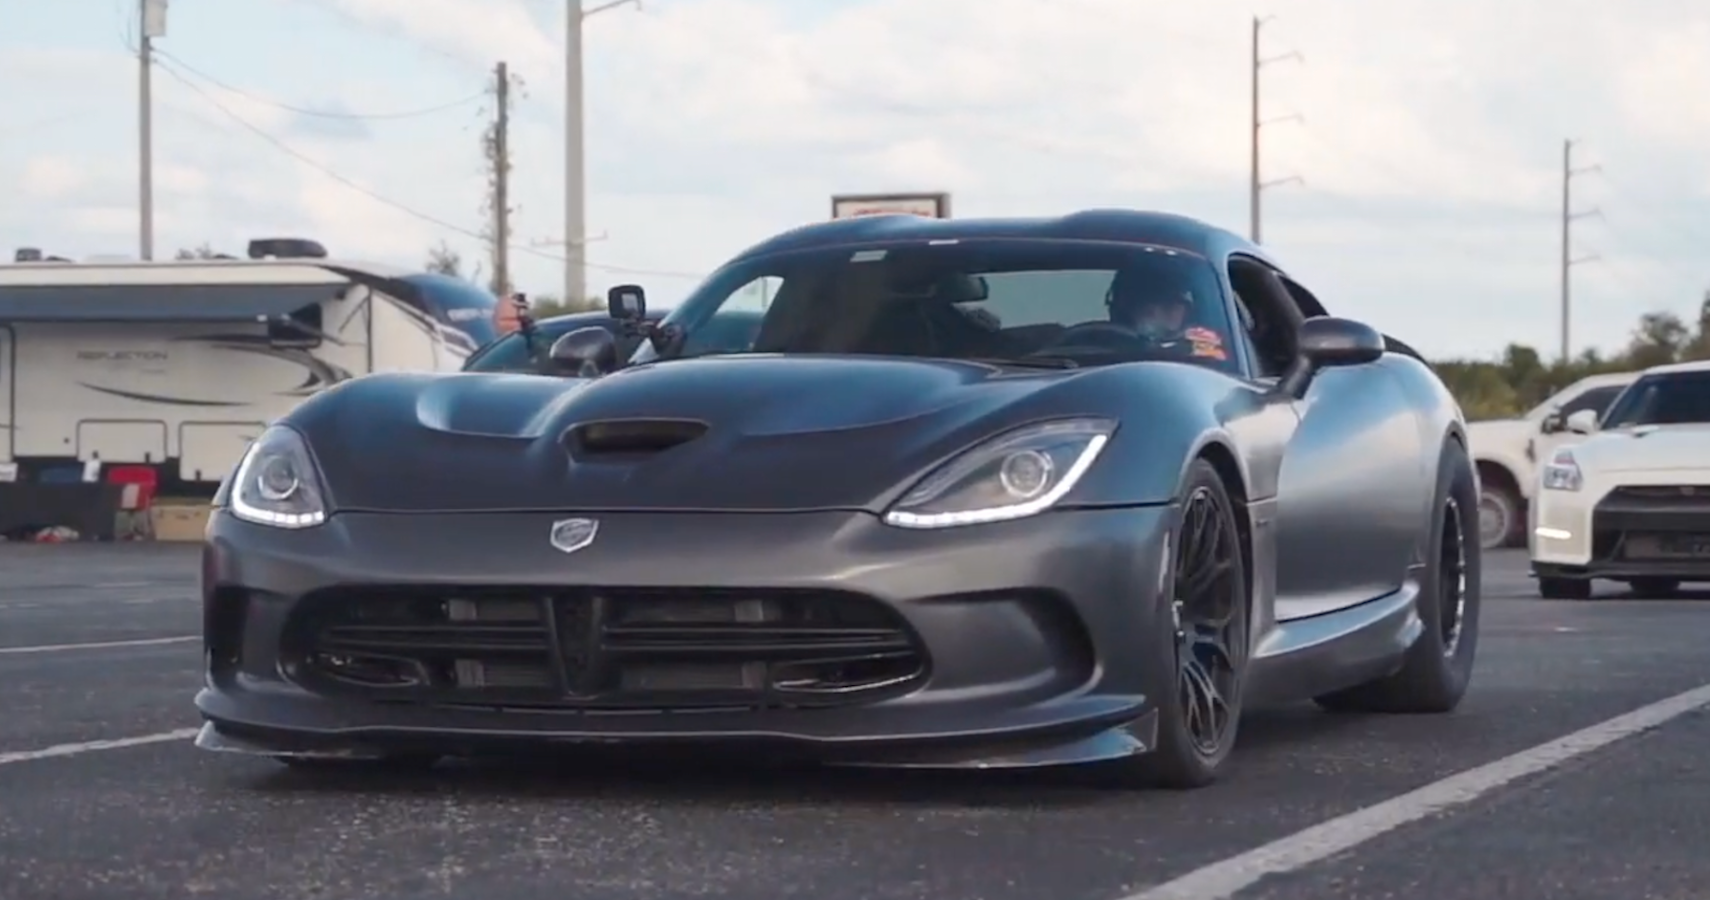 Feel A Rush Watching Four 2700-HP Dodge Vipers Battle Some Amazing AWD Cars In Drag Racing